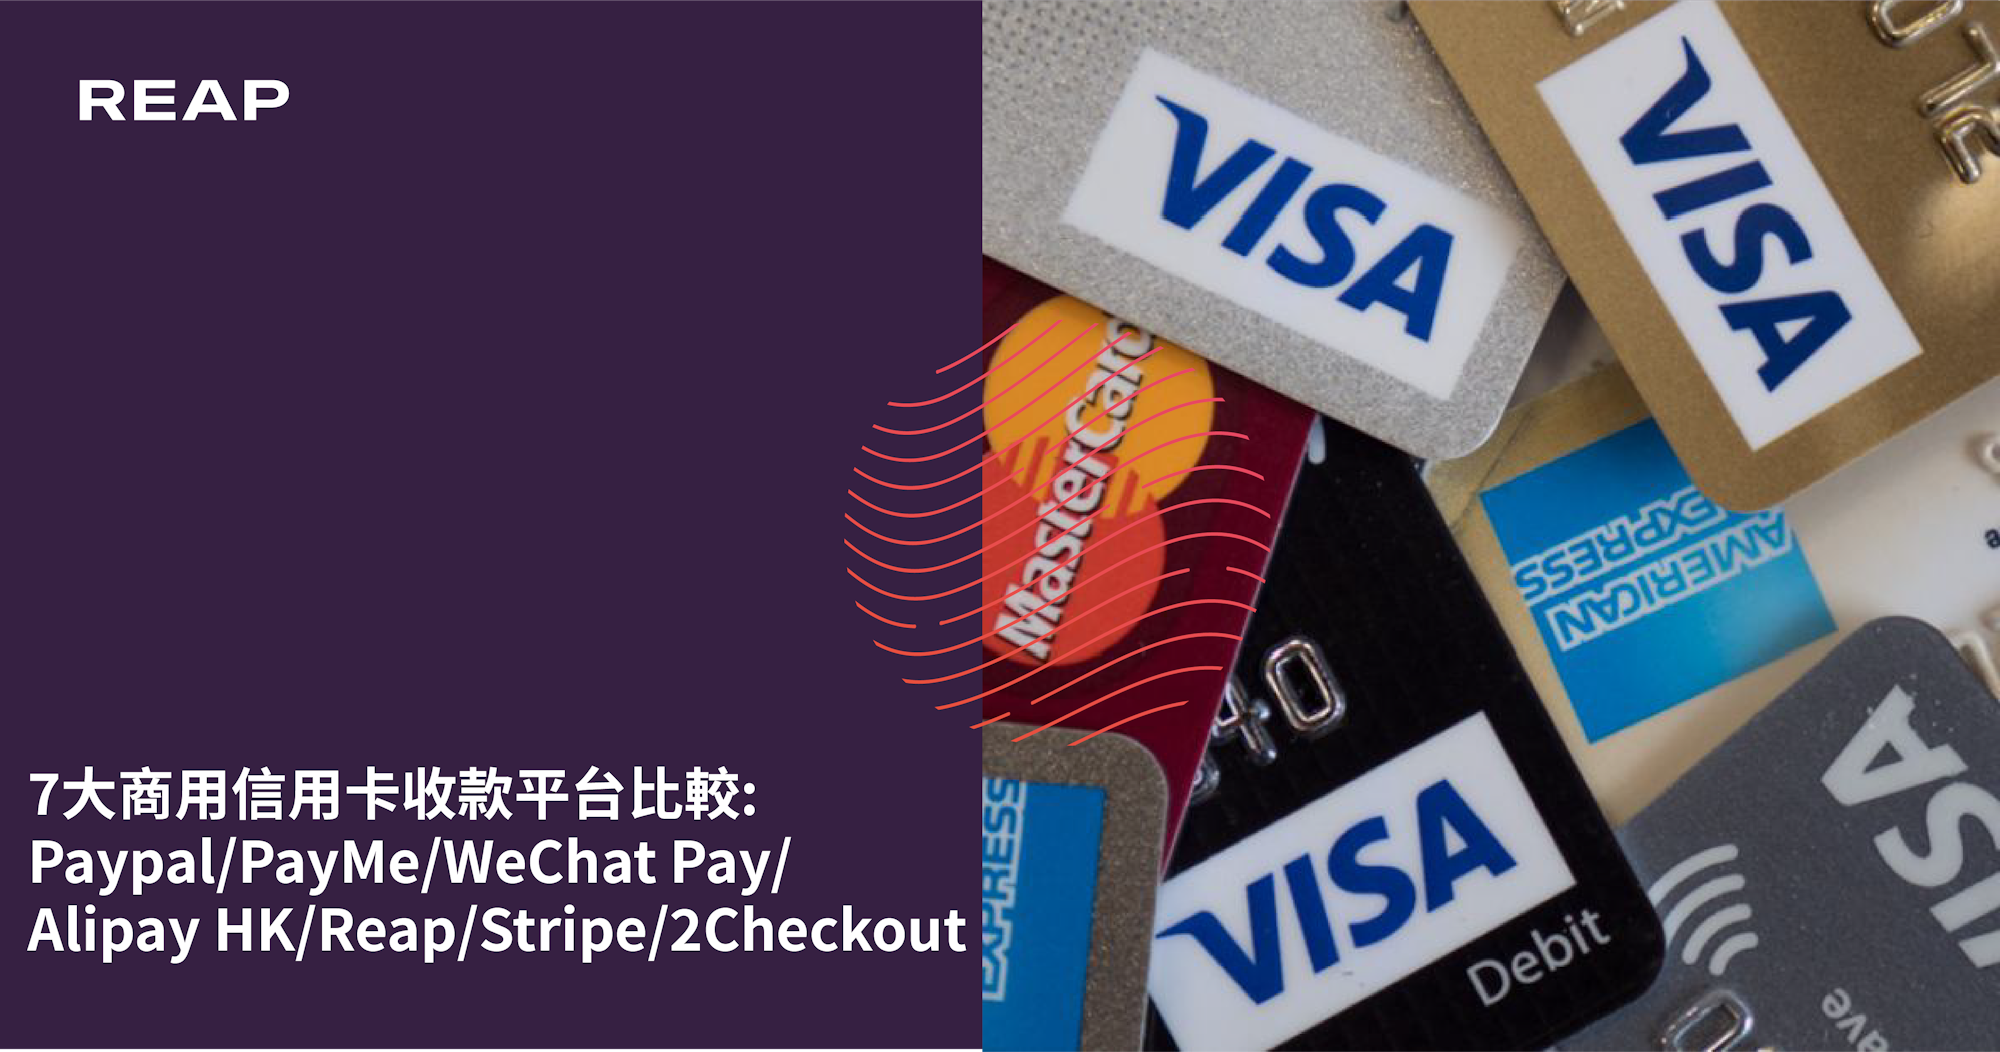 Cover Image for 7大商用信用卡收款平台比較:Paypal/PayMe/WeChat Pay/Alipay HK/Reap/Stripe/2Checkout